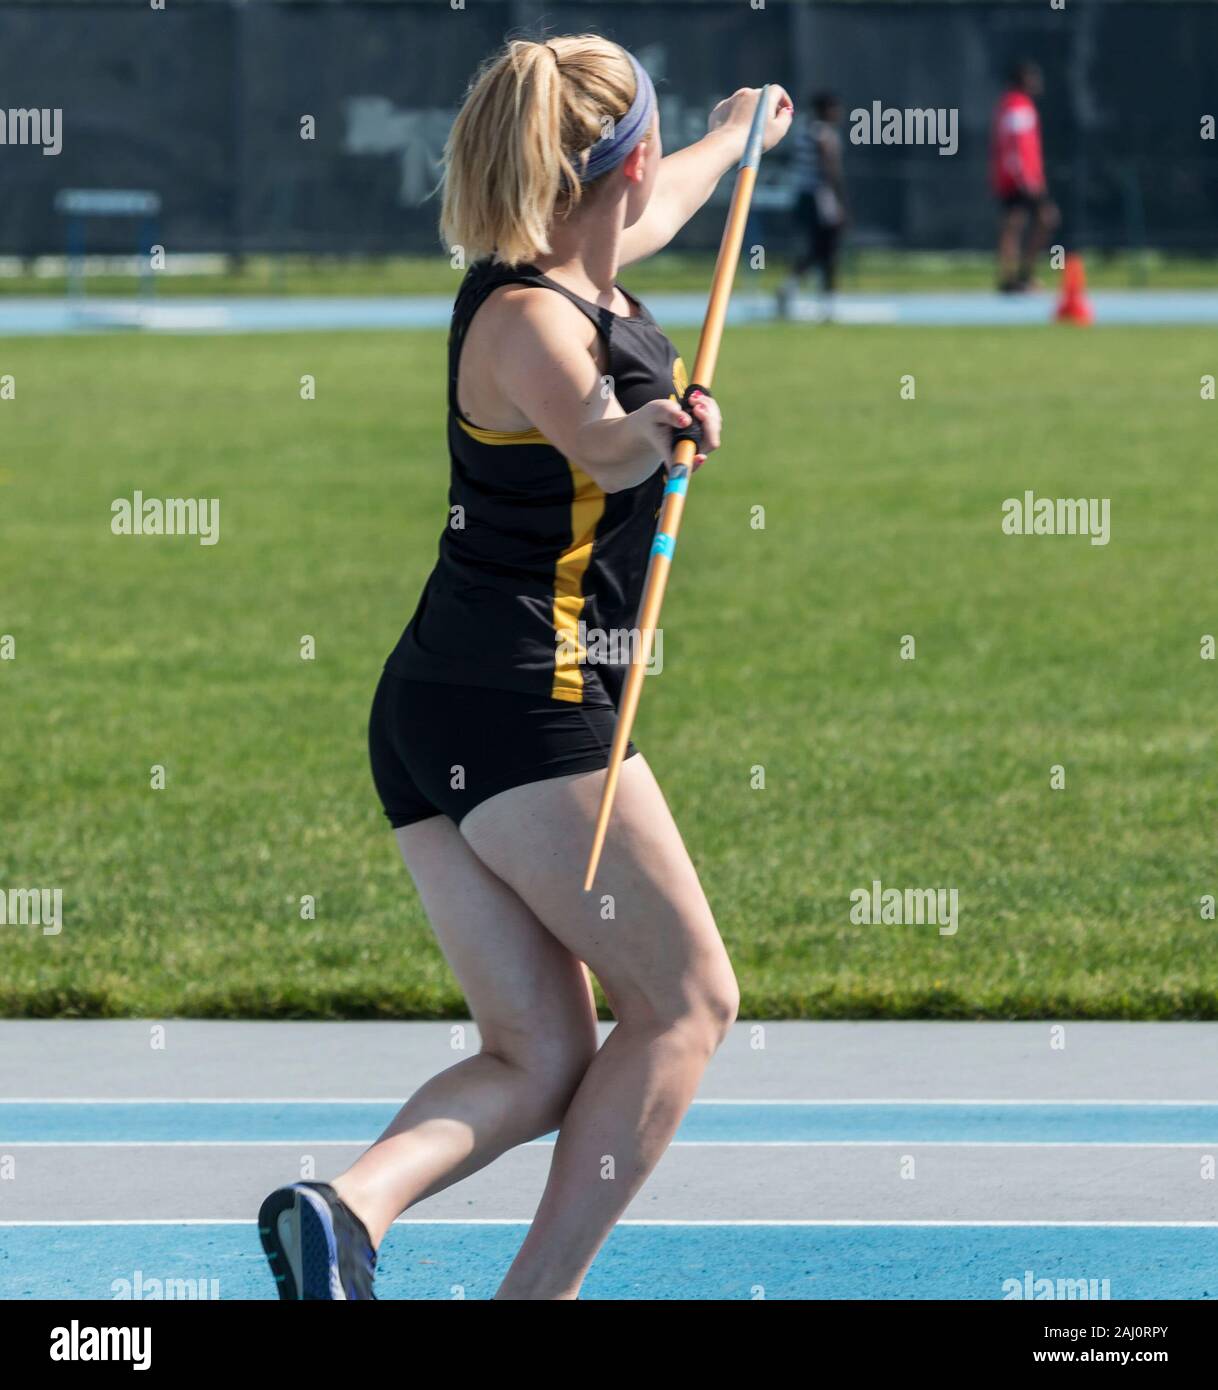 A view from behind a high school girl throwing a javelin out to a green grass field at a track and field competition. Stock Photo